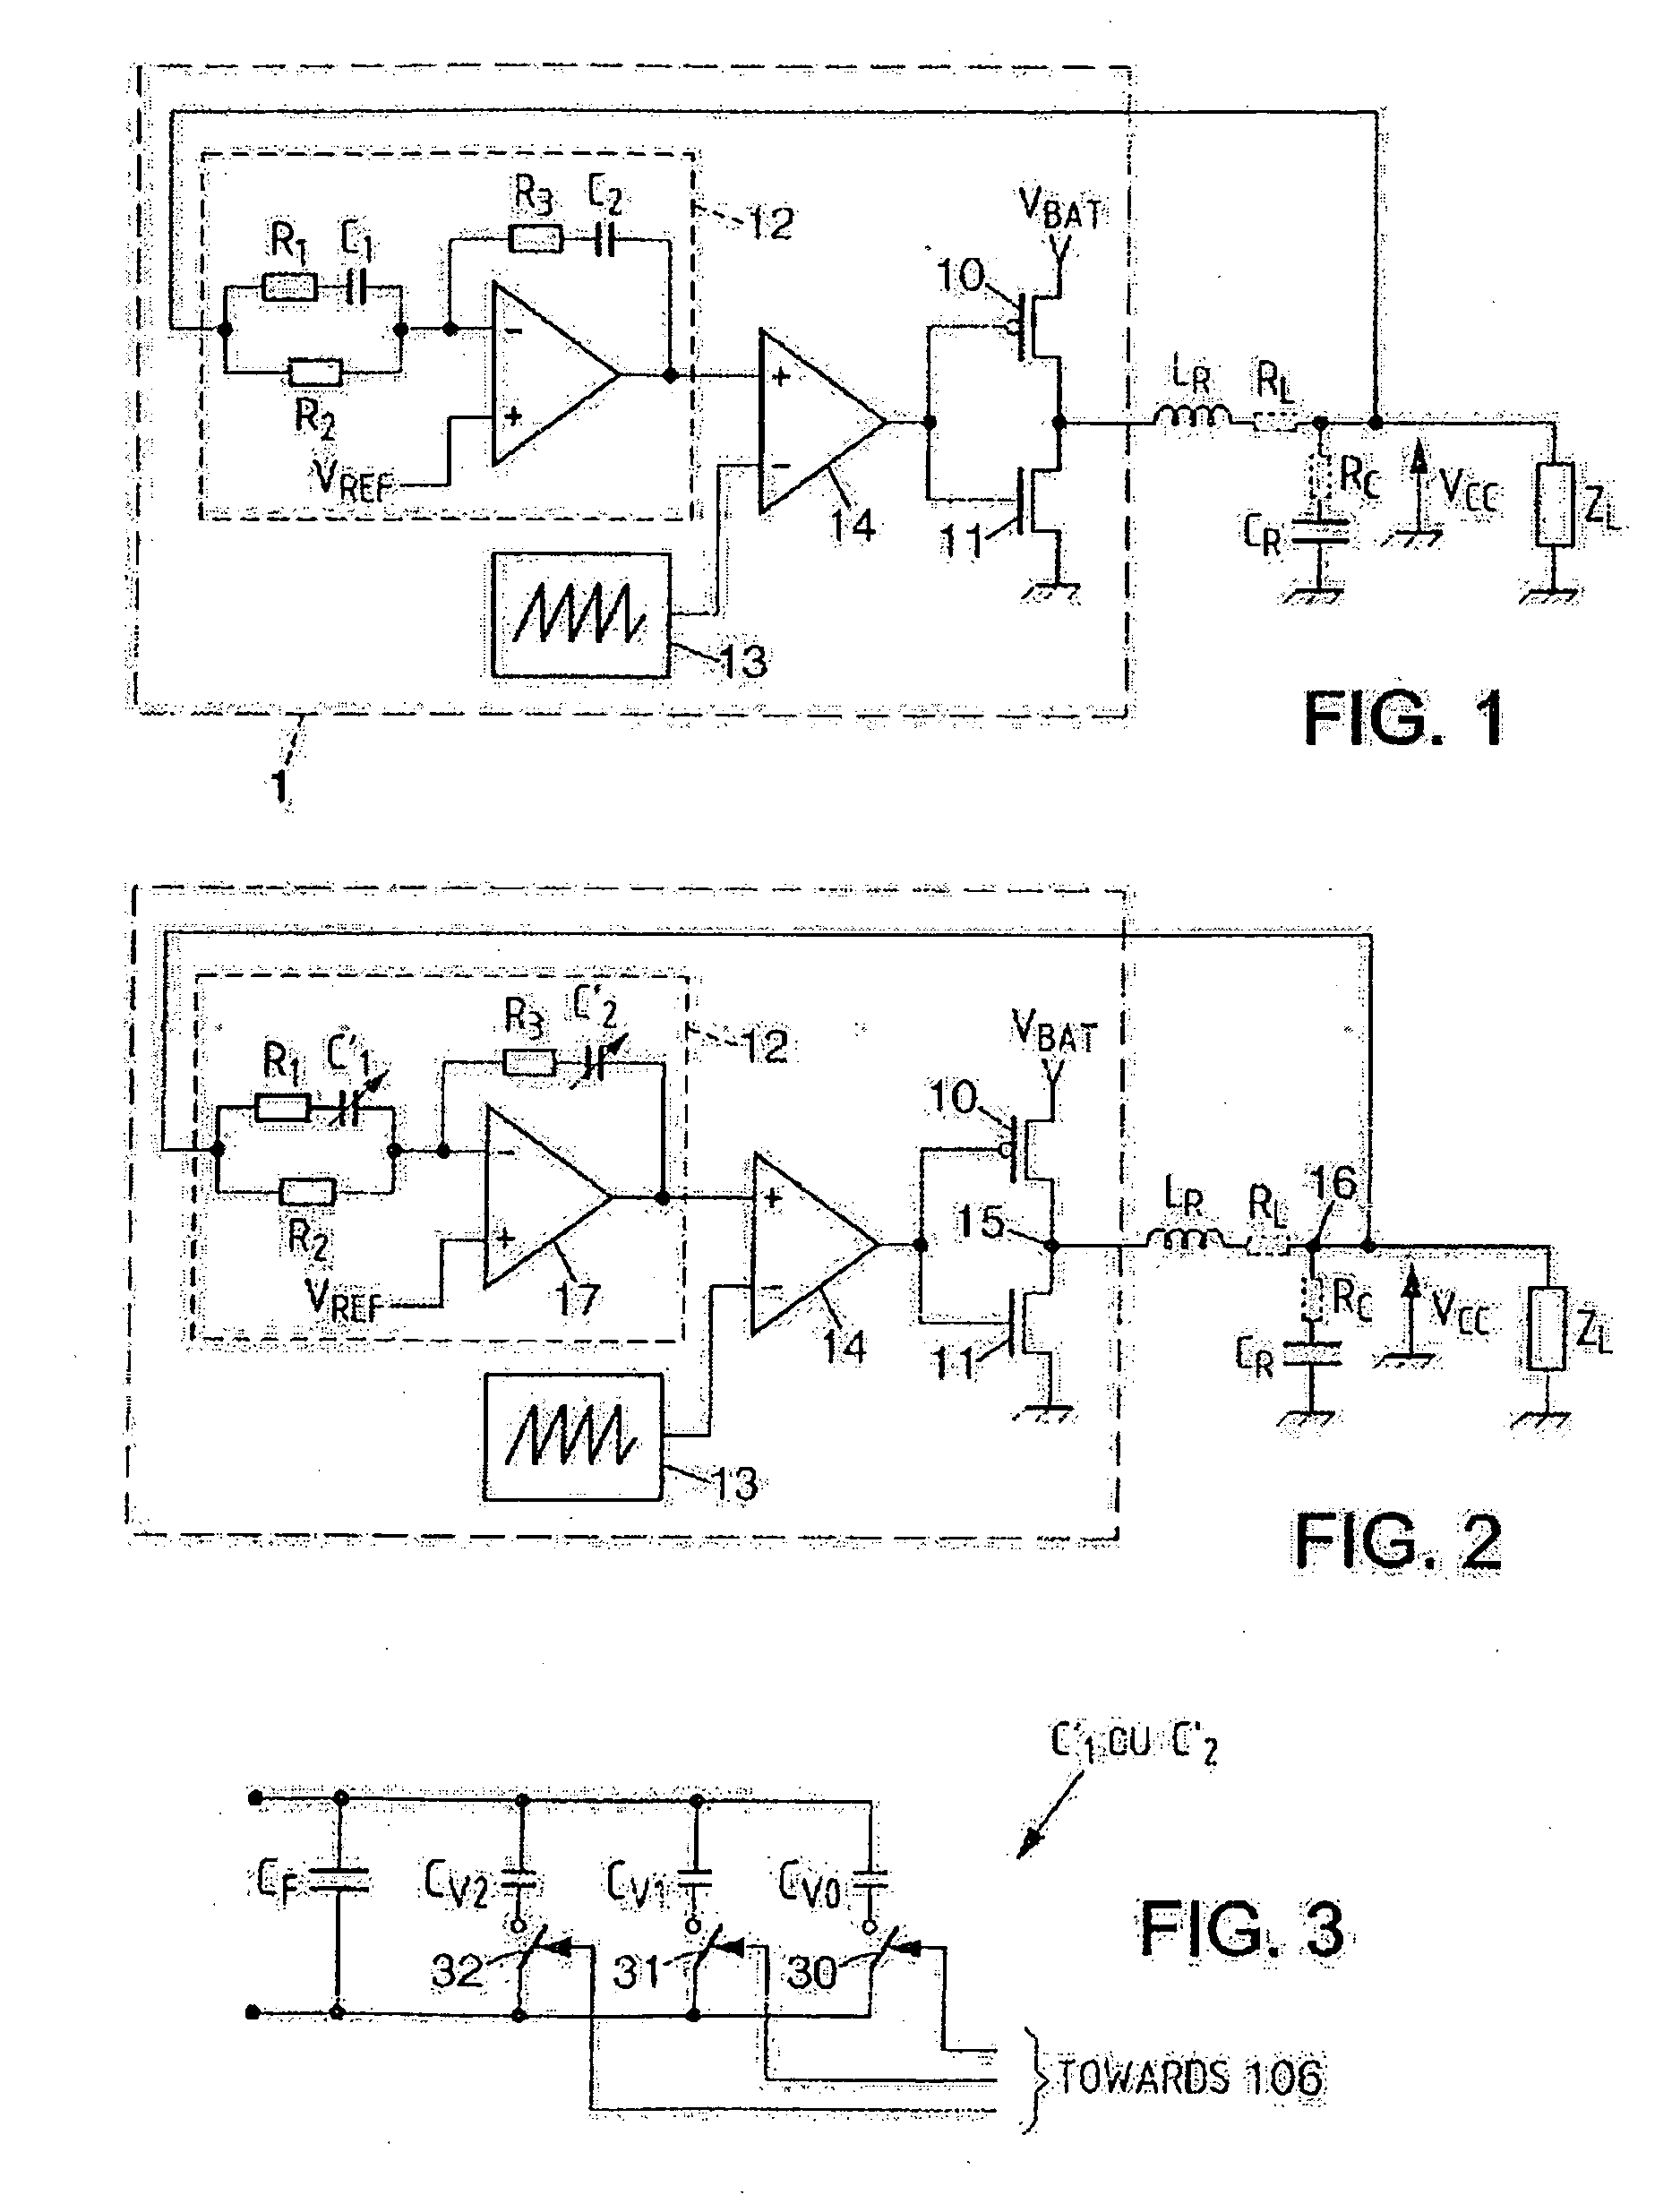 Auto-adjustment of RC cells within a circuit